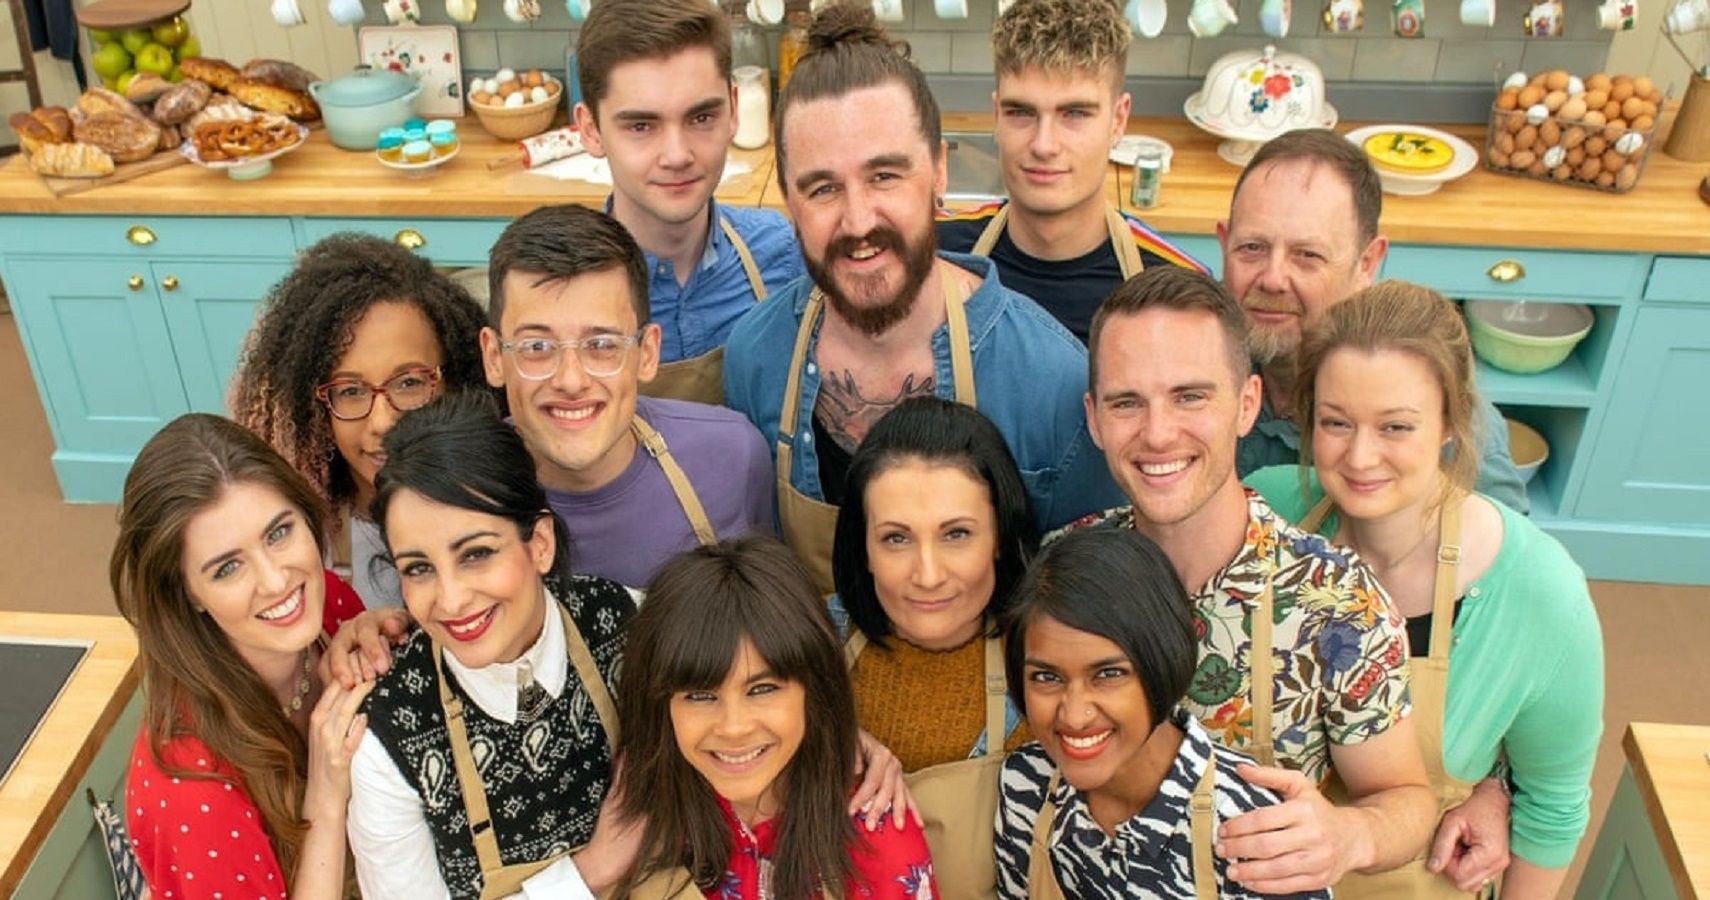 The Great British Bake Off Season 10 The 10 Best Bakers Ranked